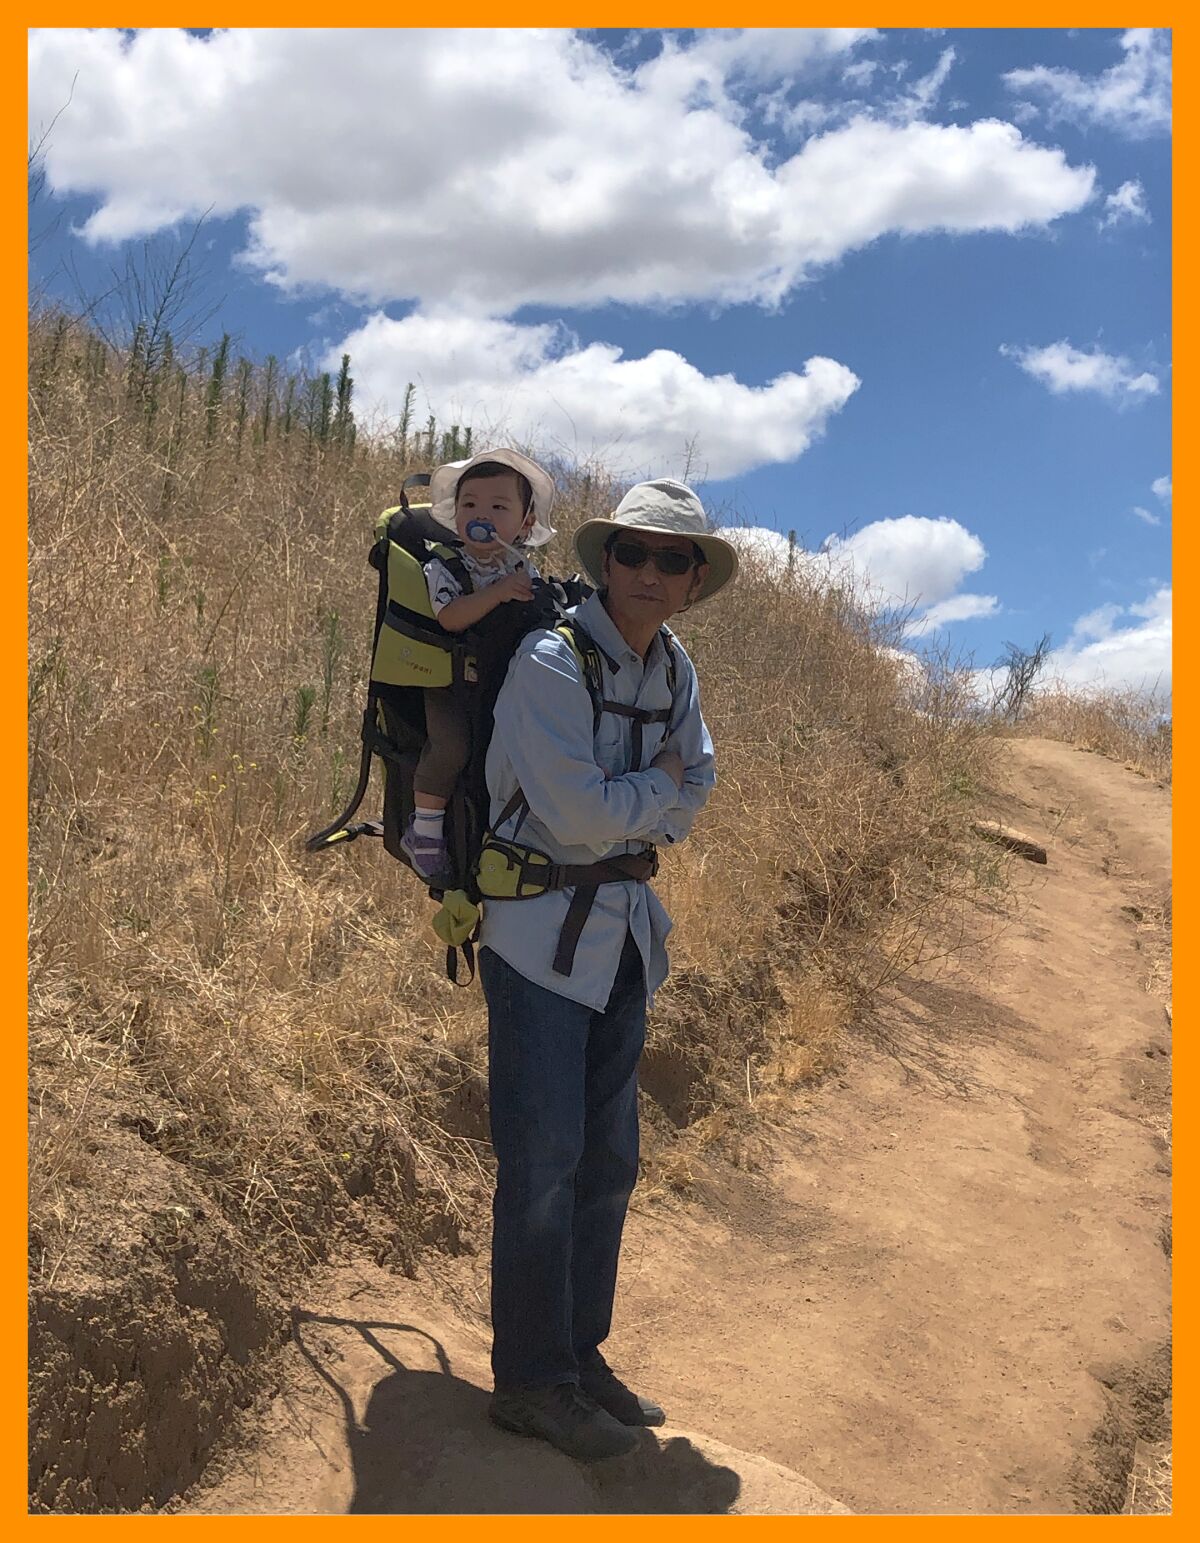 A man in a hat stands with a baby in a carrier on his back on a dirt path under a blue sky with puffy white clouds.